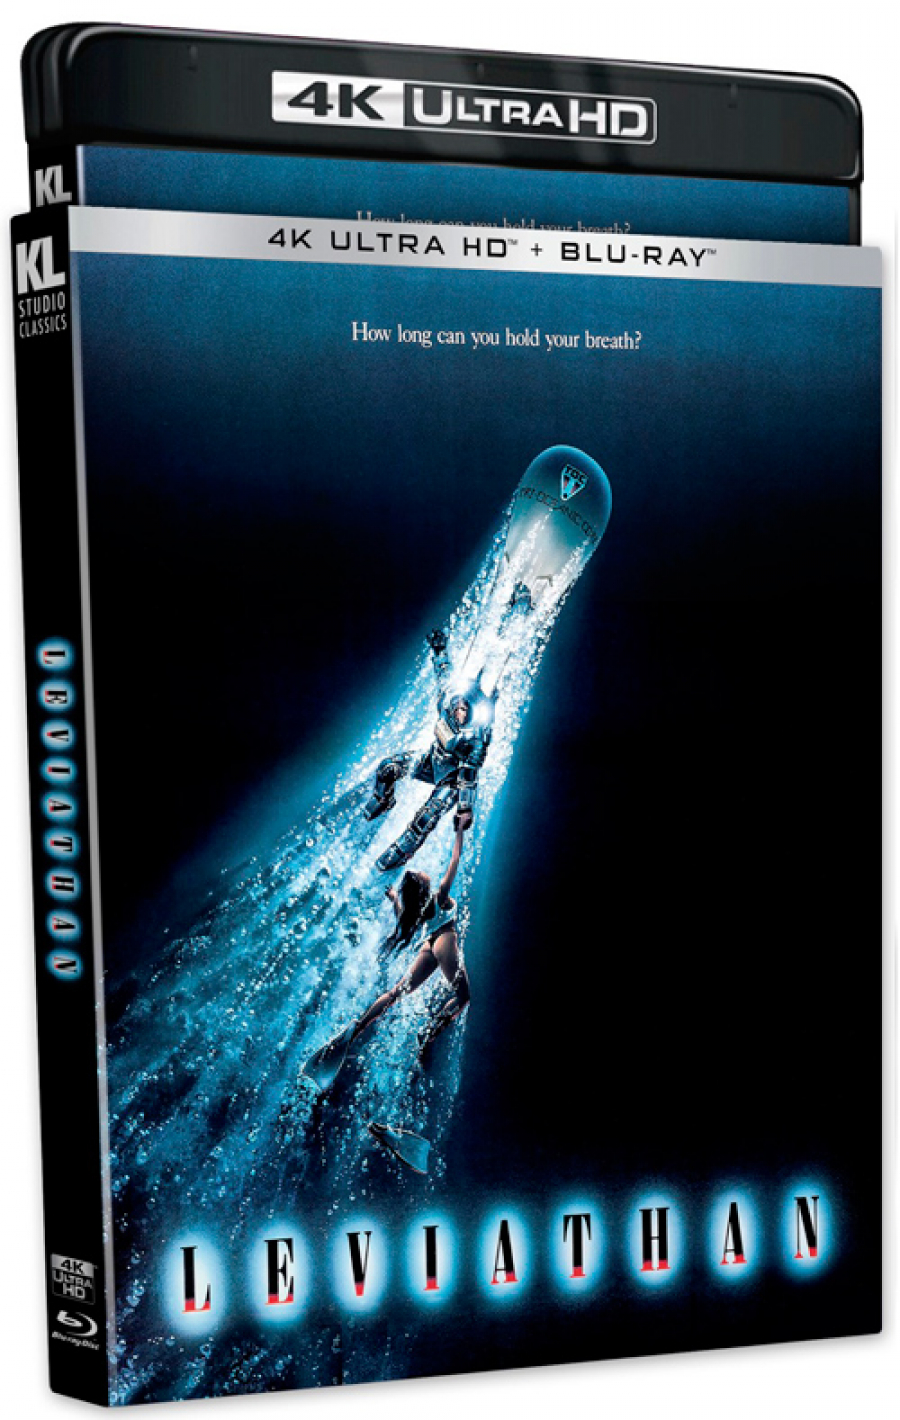 Missed opportunity: WB not releasing “The Right Stuff” 4K for its 40th  anniversary : r/4kbluray